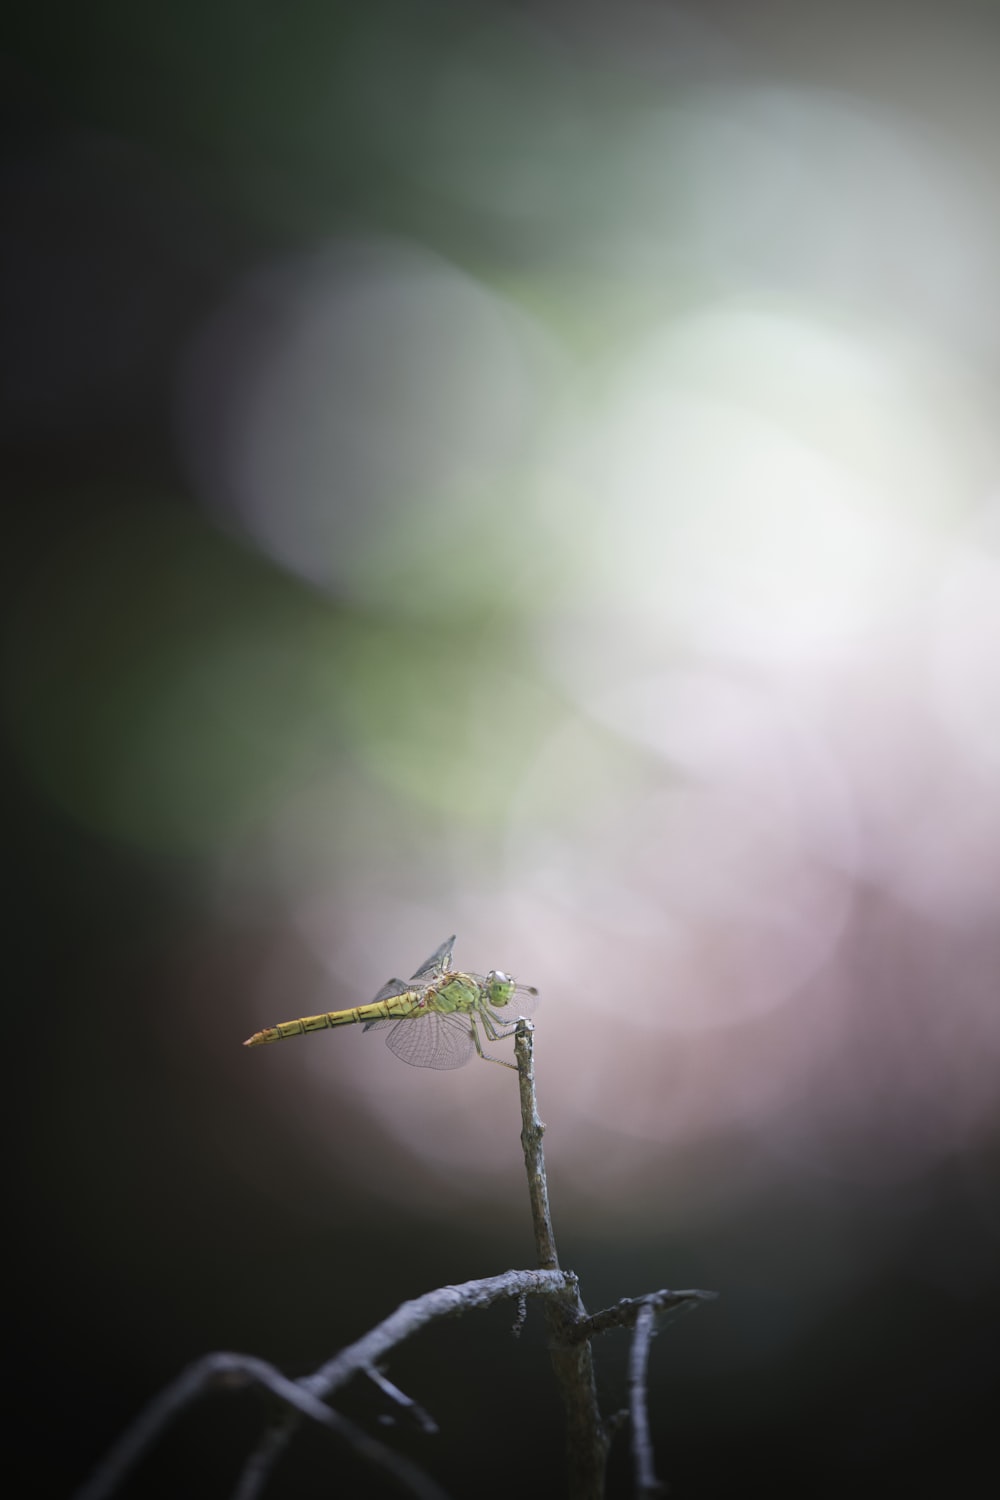 a bug on a branch